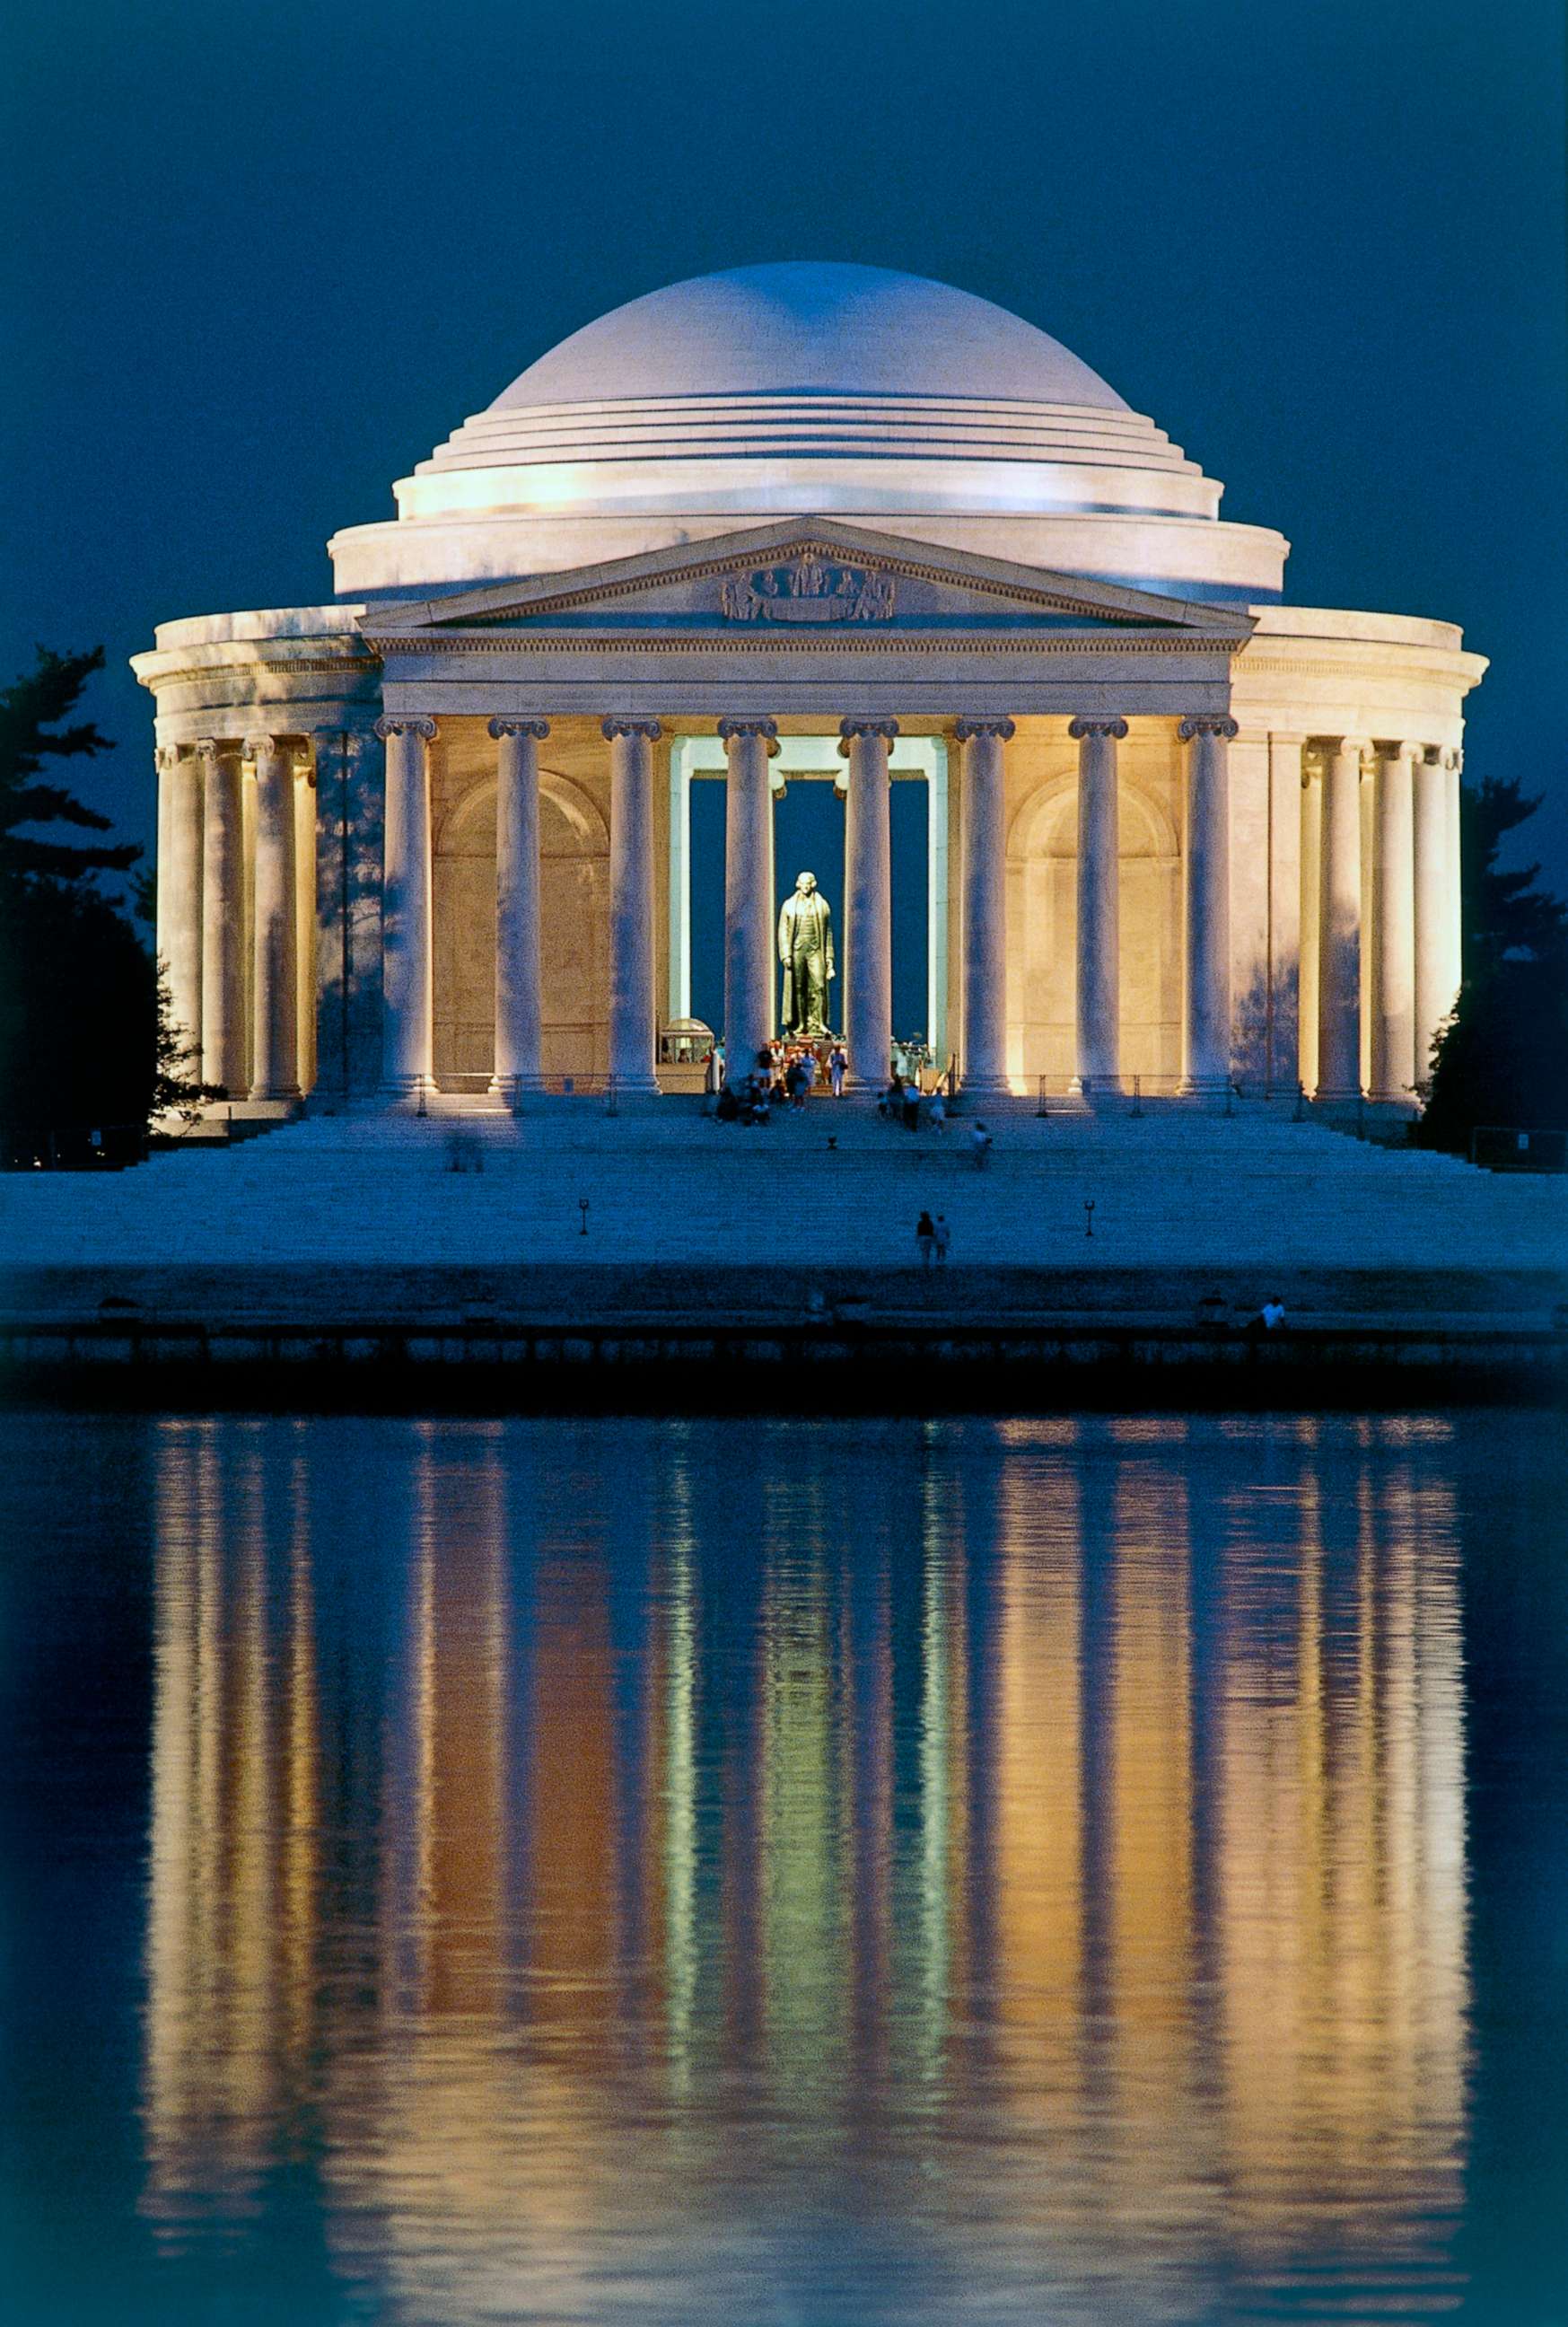 PHOTO: A statue of President Jefferson is visible through the pillars of the Thomas Jefferson Memorial at night in Washington, April 23, 2016.